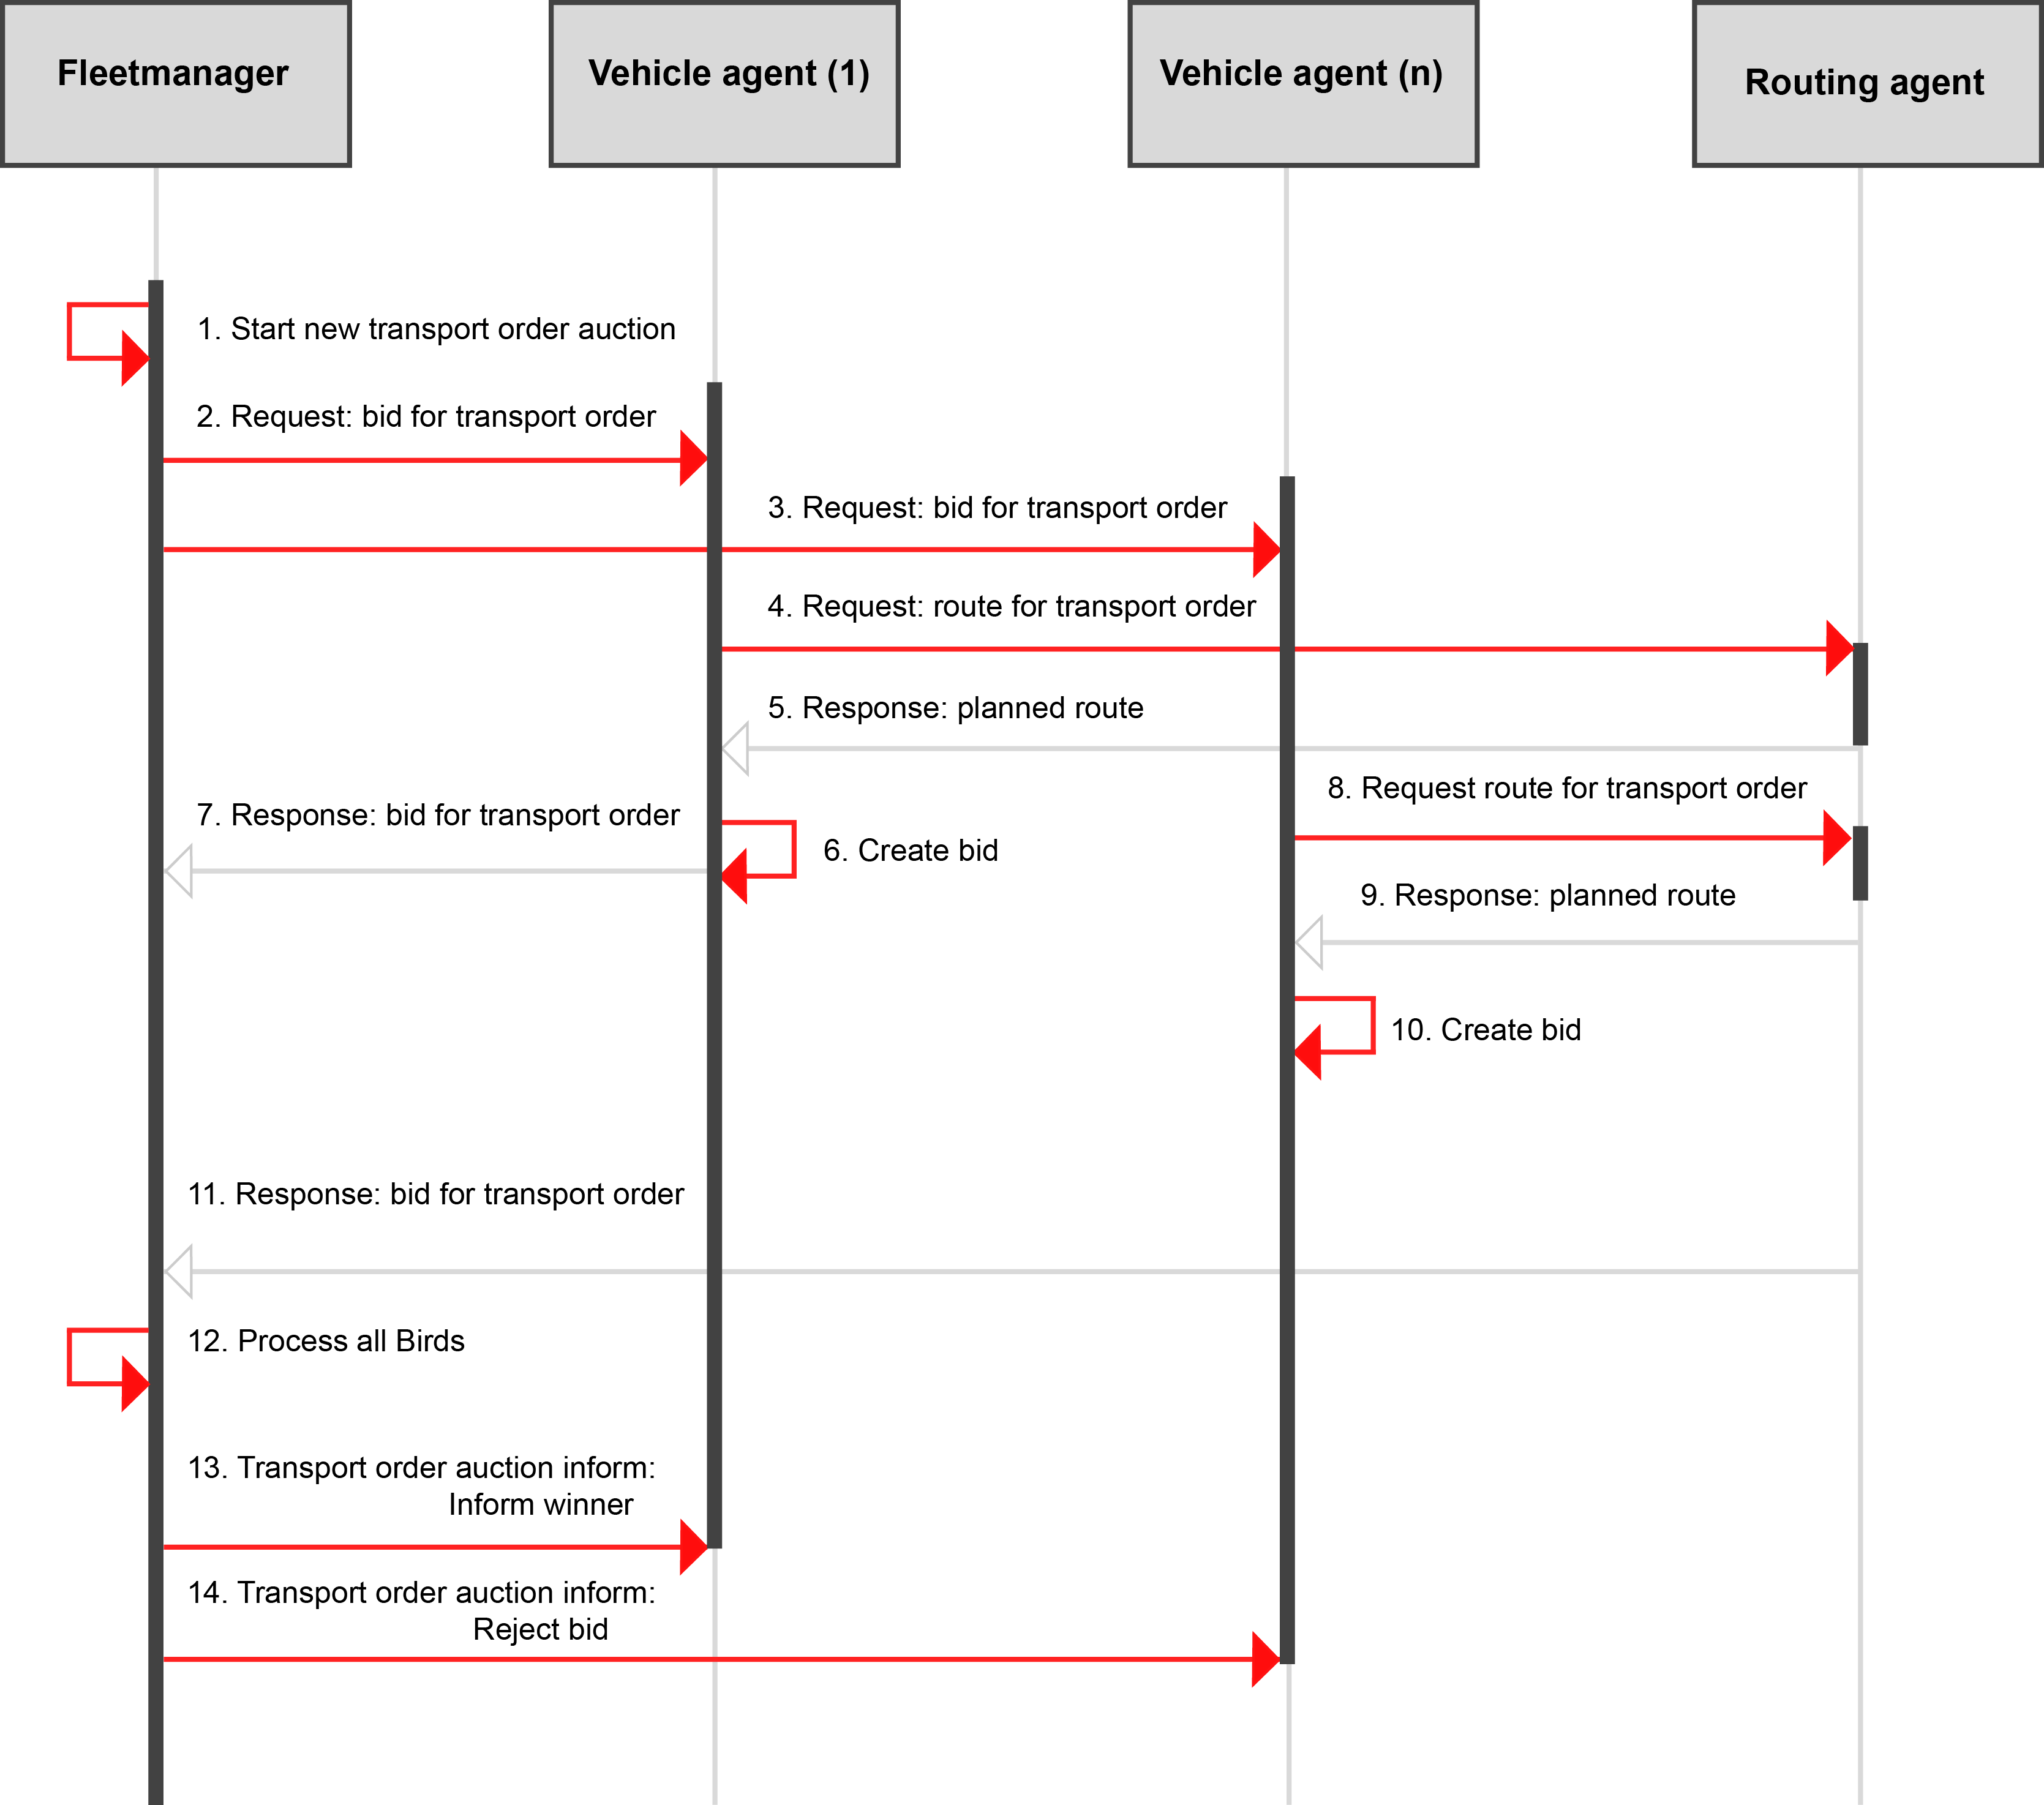 Sequence diagram of a transport order auction: the participating agents as well as the communication process between them are shown.